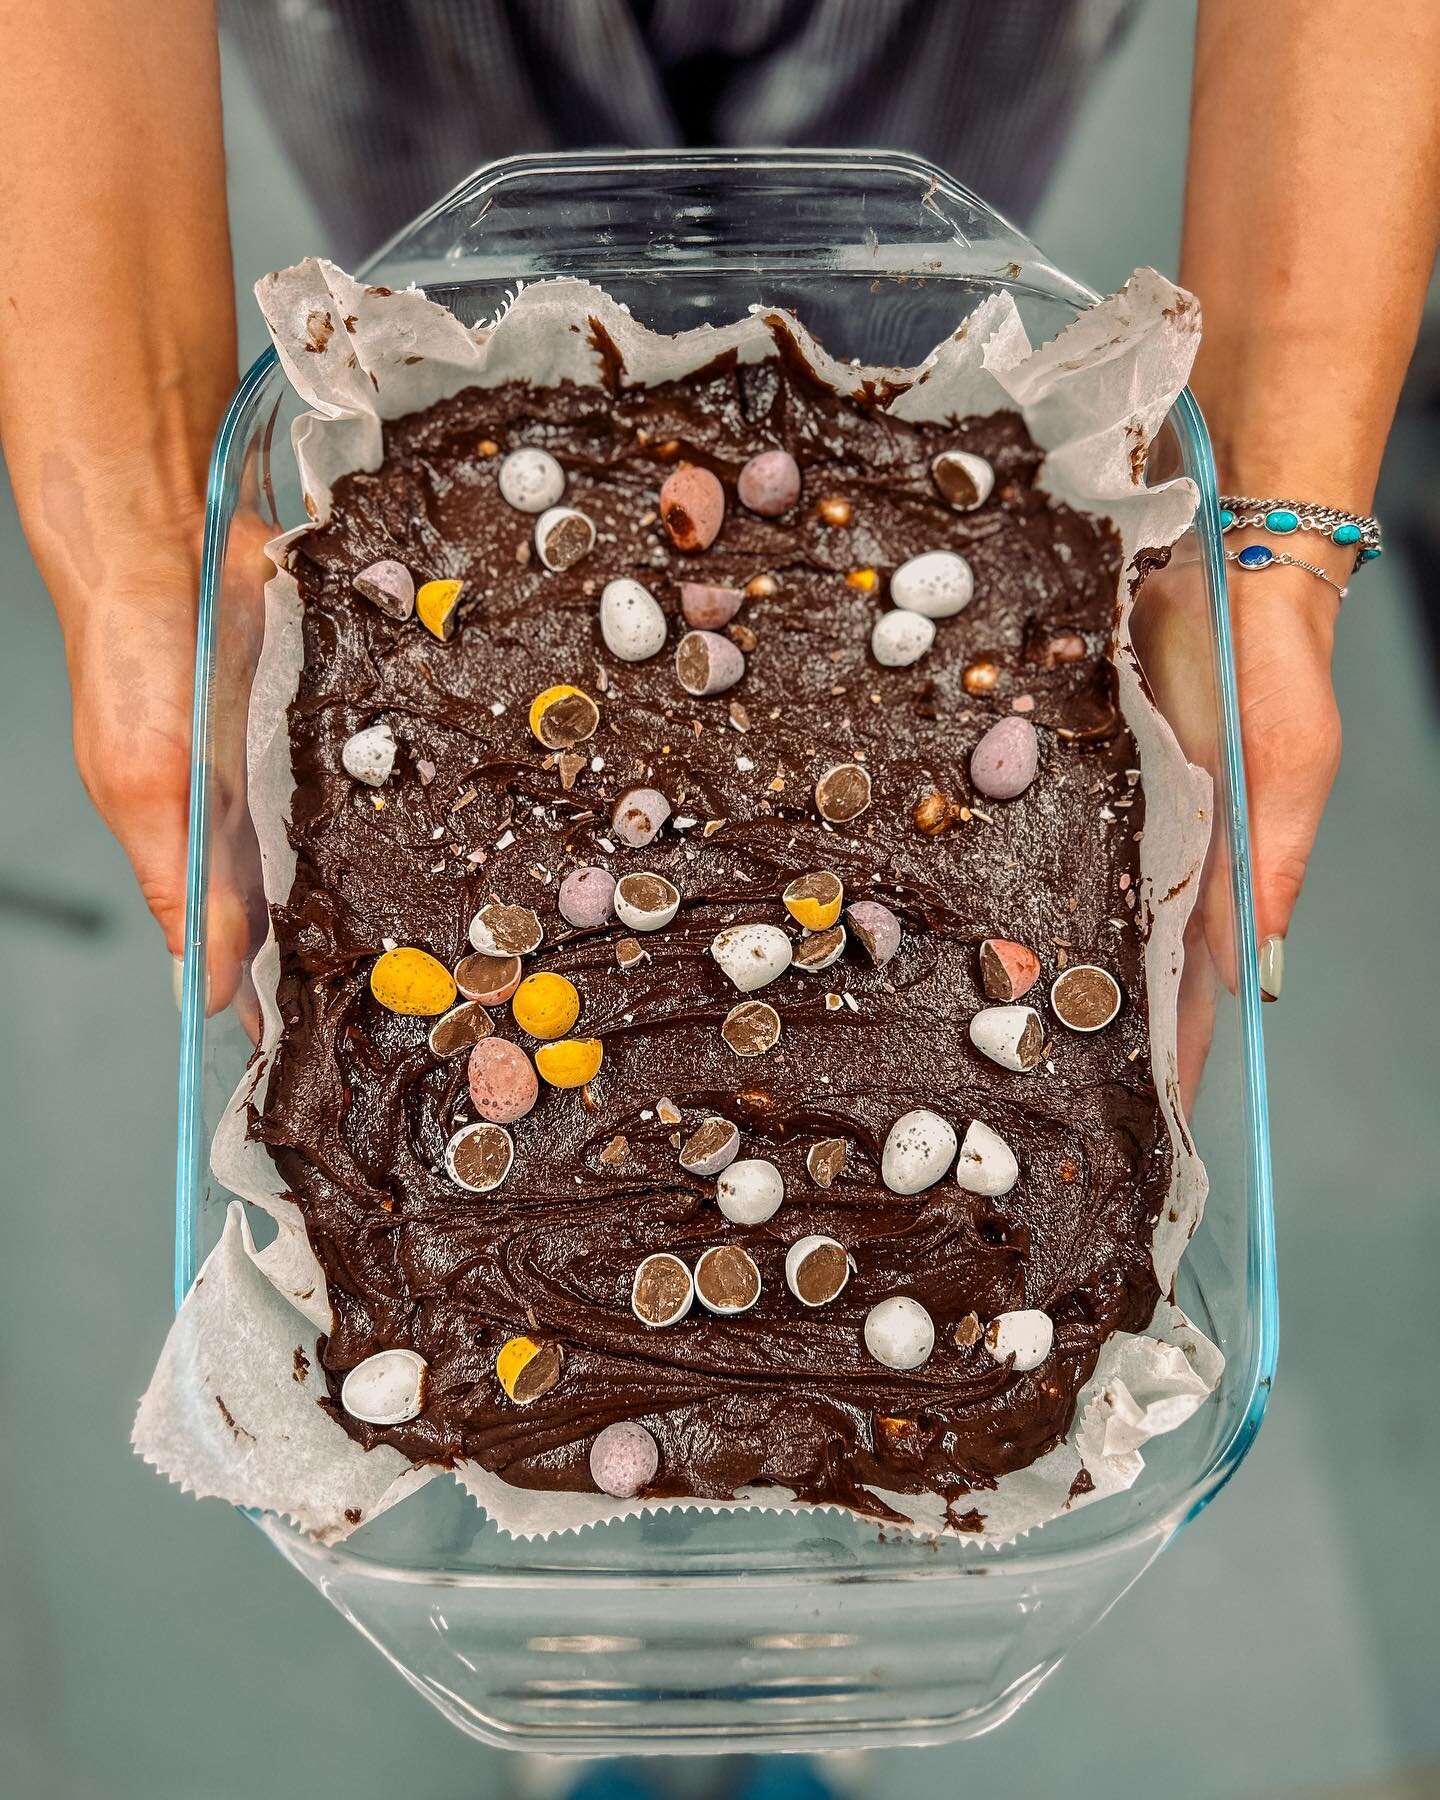 BEFORE AND AFTER🤤🤤🤤🐣

The time has come for Easter themed sweet treats on the counter, available from tomorrow morning&hellip;

👉 dark chocolate, mini egg brownies😋